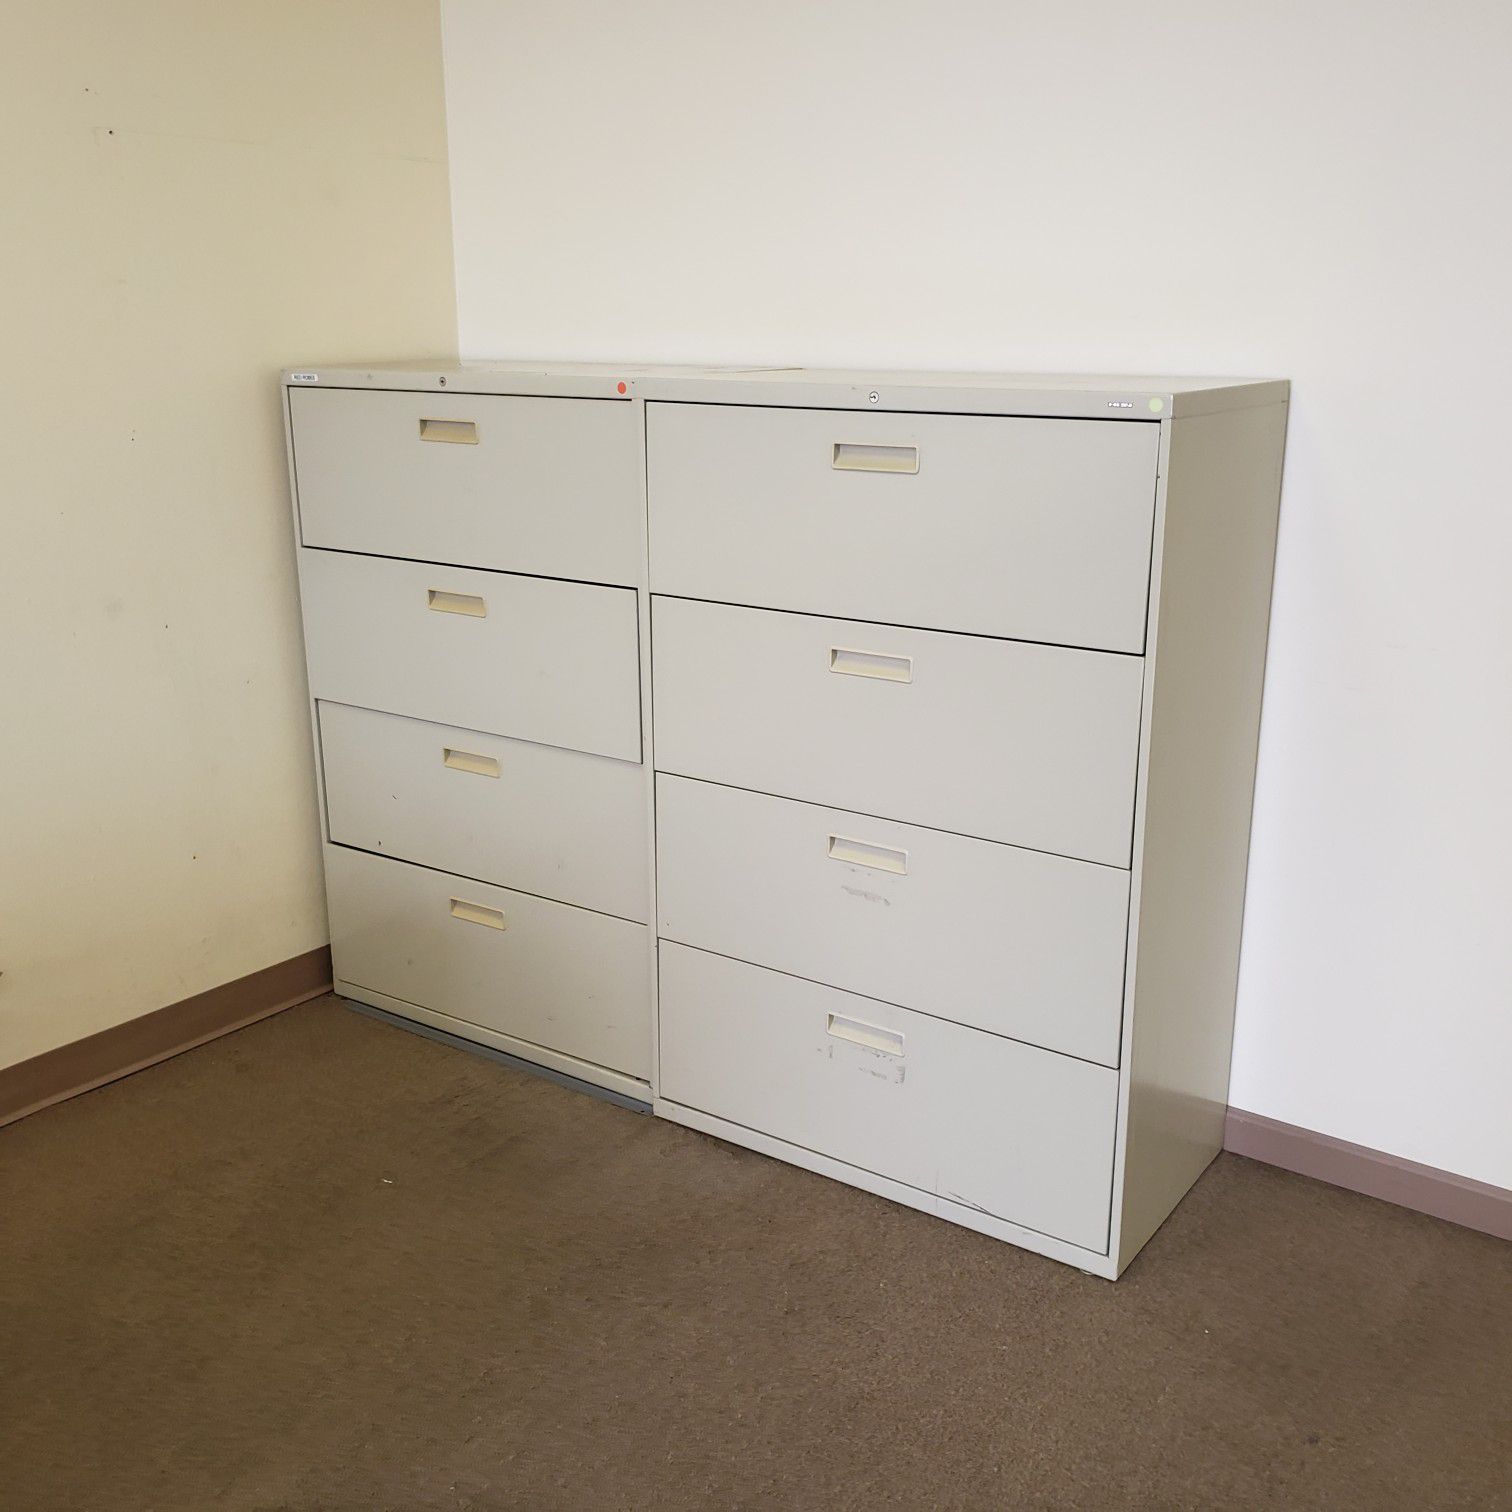 OFFICE FURNITURE. CHEAP. EVERYTHING MUST GO!